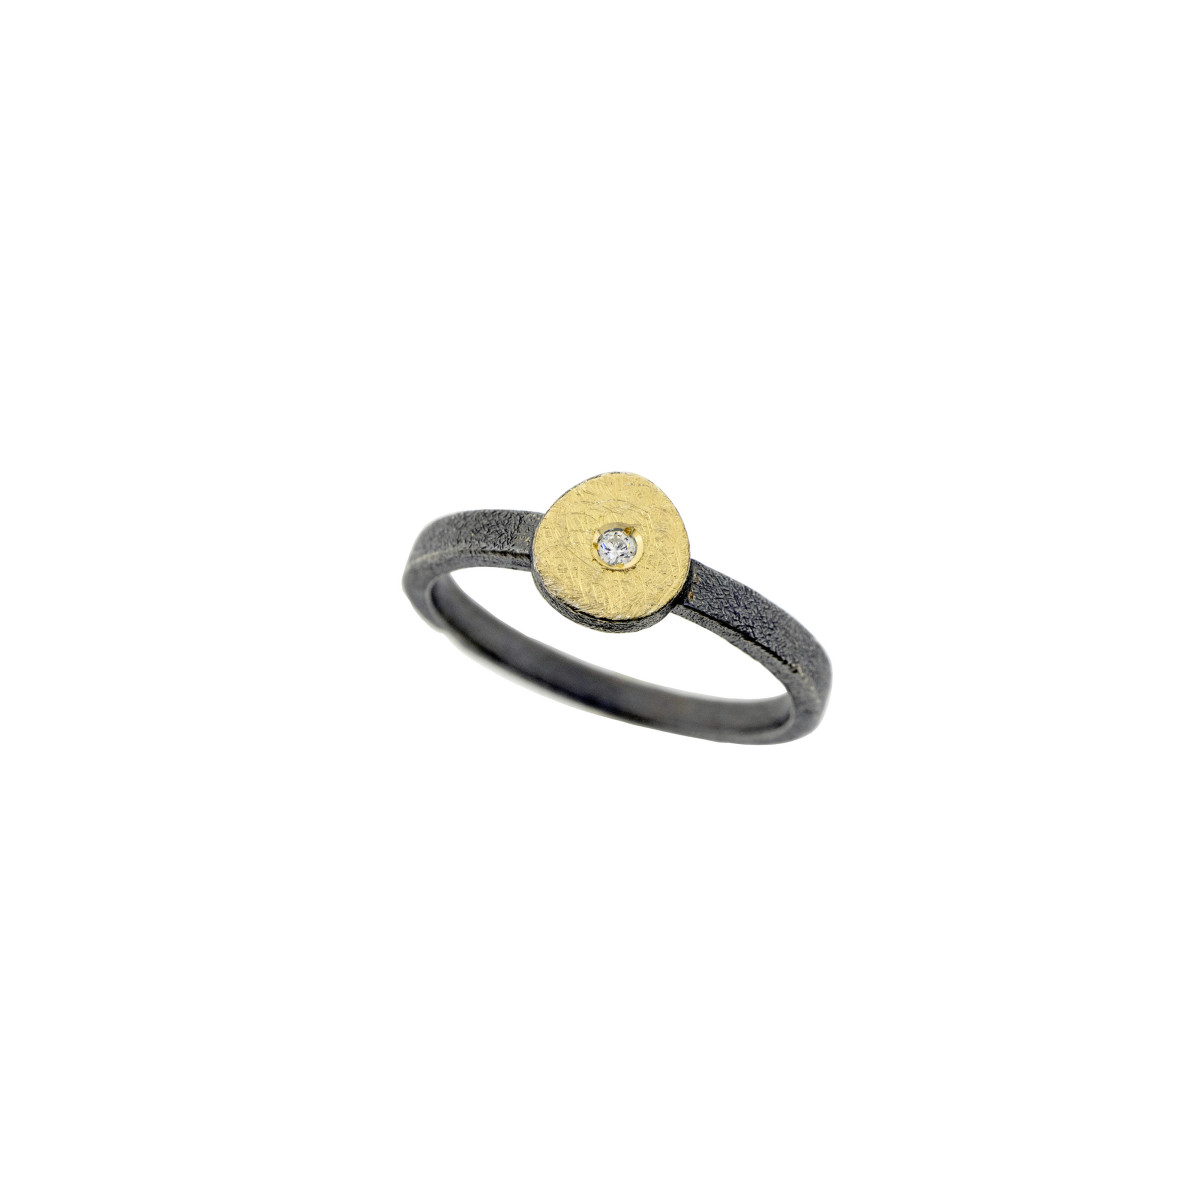 Oxidized, gold and shiny silver ring